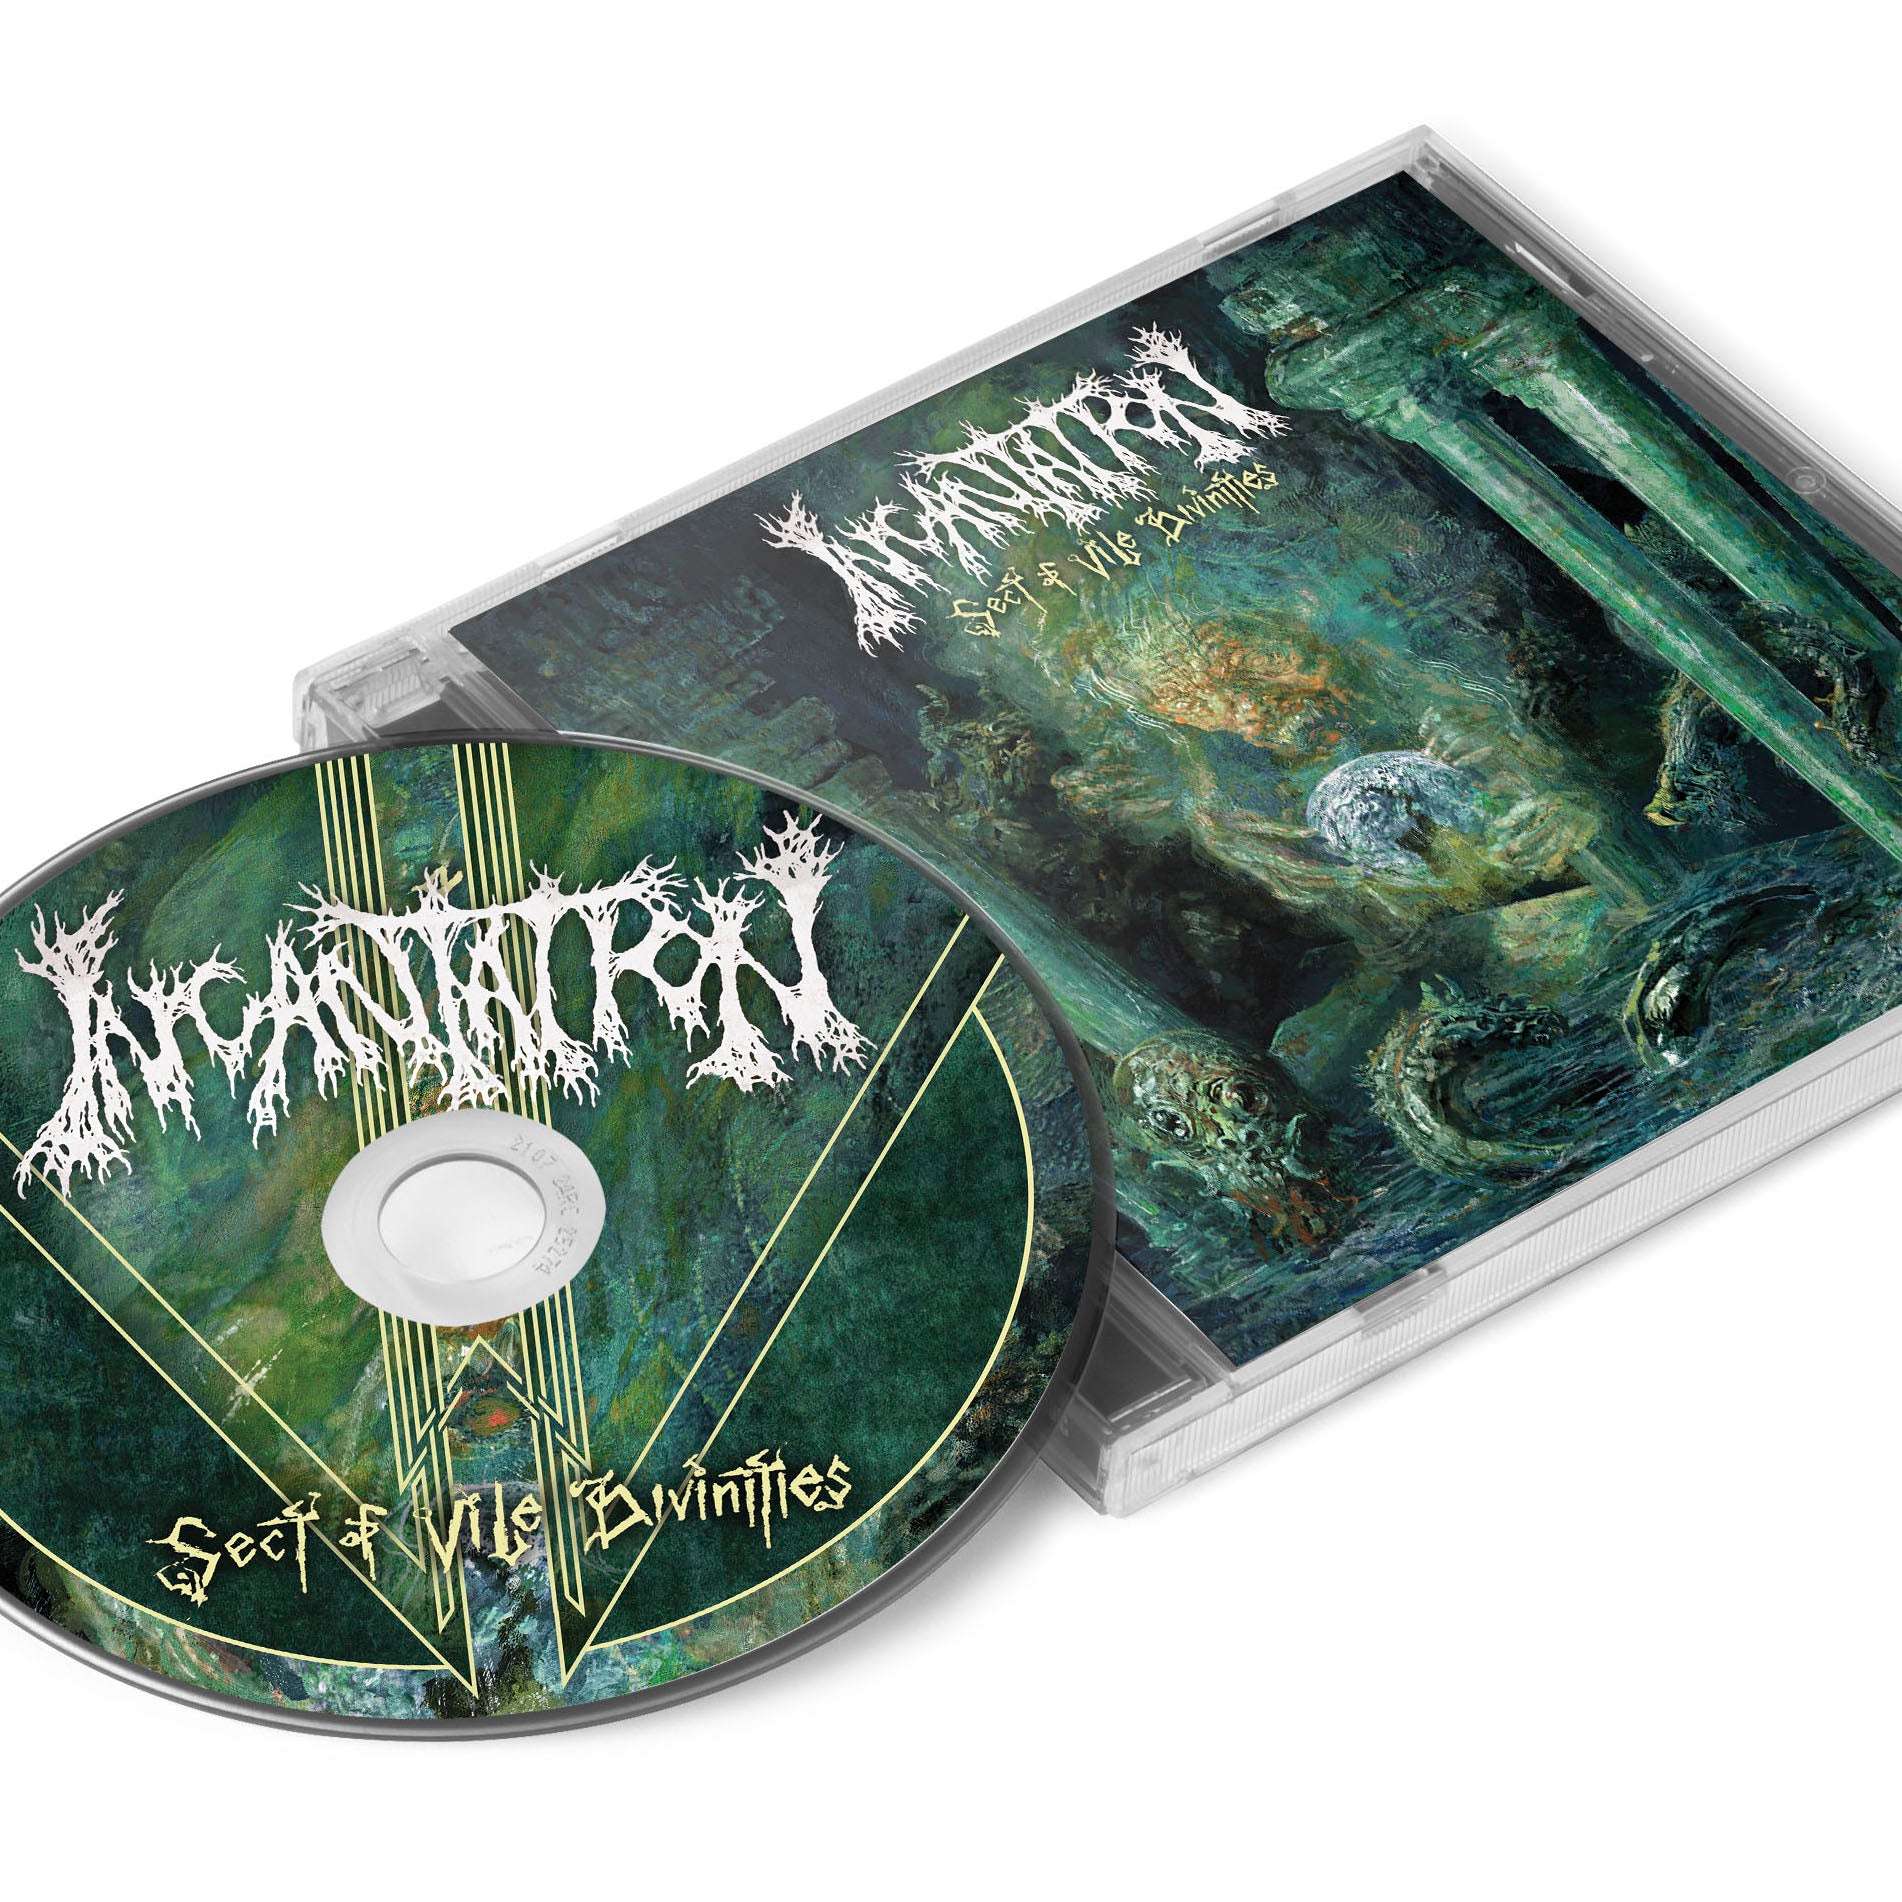 Incantation "Sect of Vile Divinities" CD